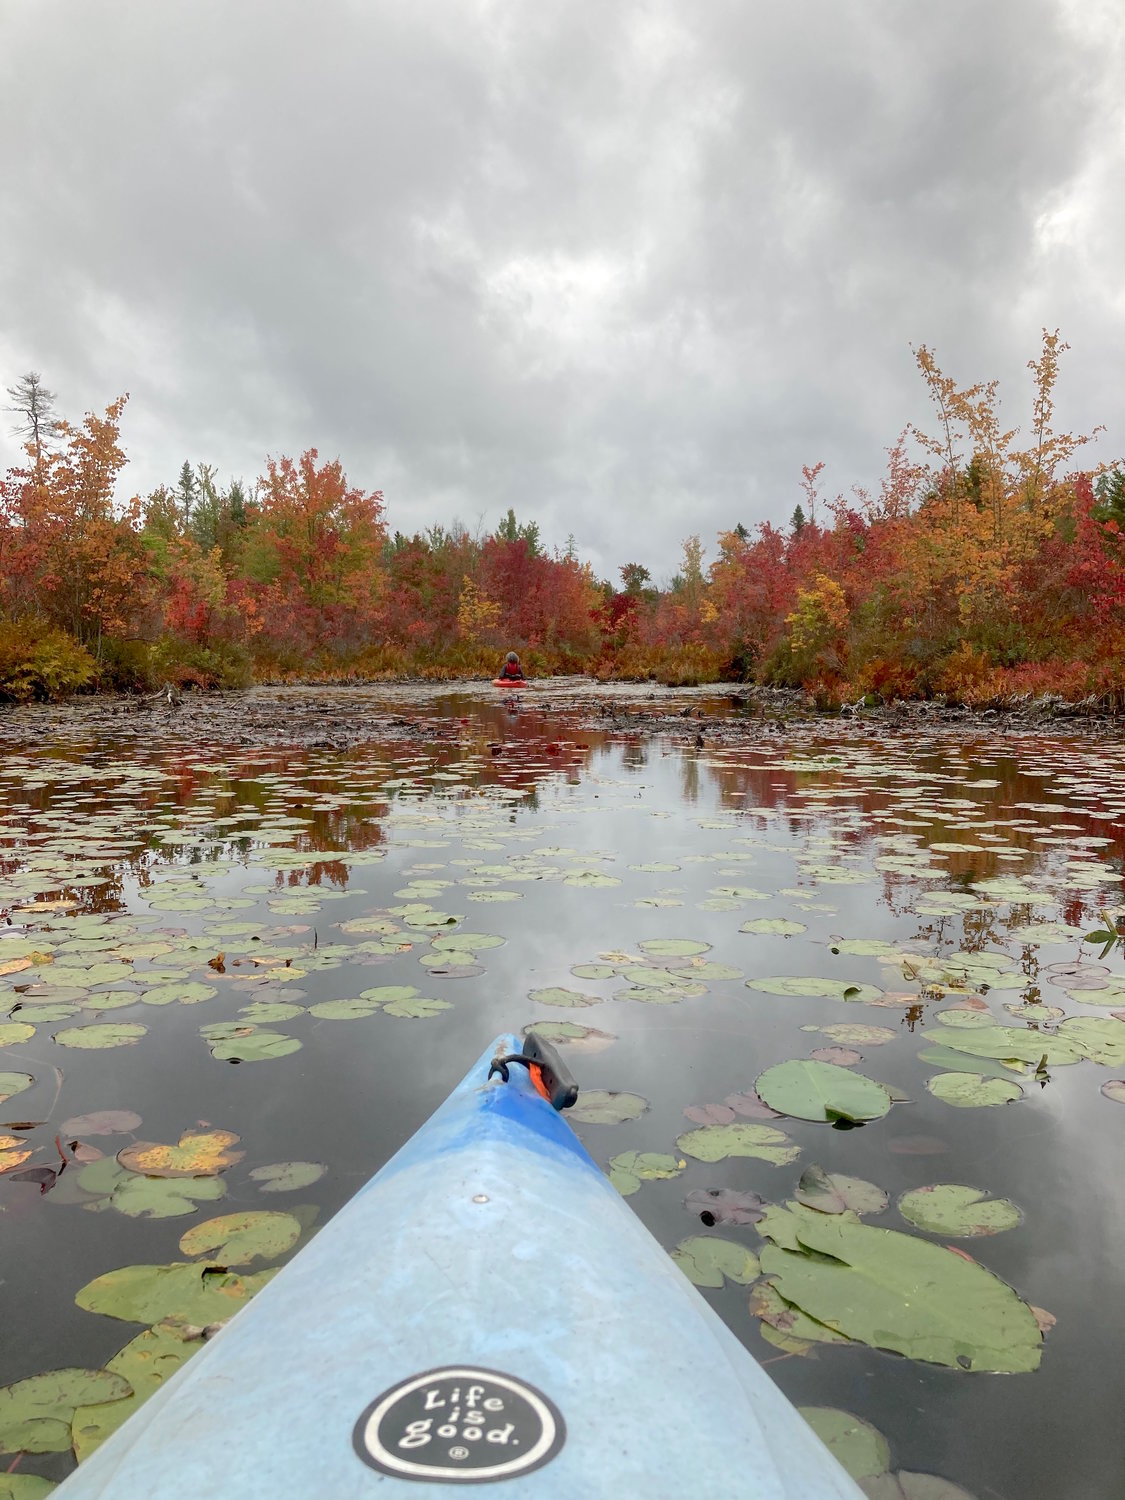 Kayaks and canoes provide the perfect water vehicles to explore the otherwise difficult to access coves of lakes and ponds where a variety of plant and animal life can be observed.